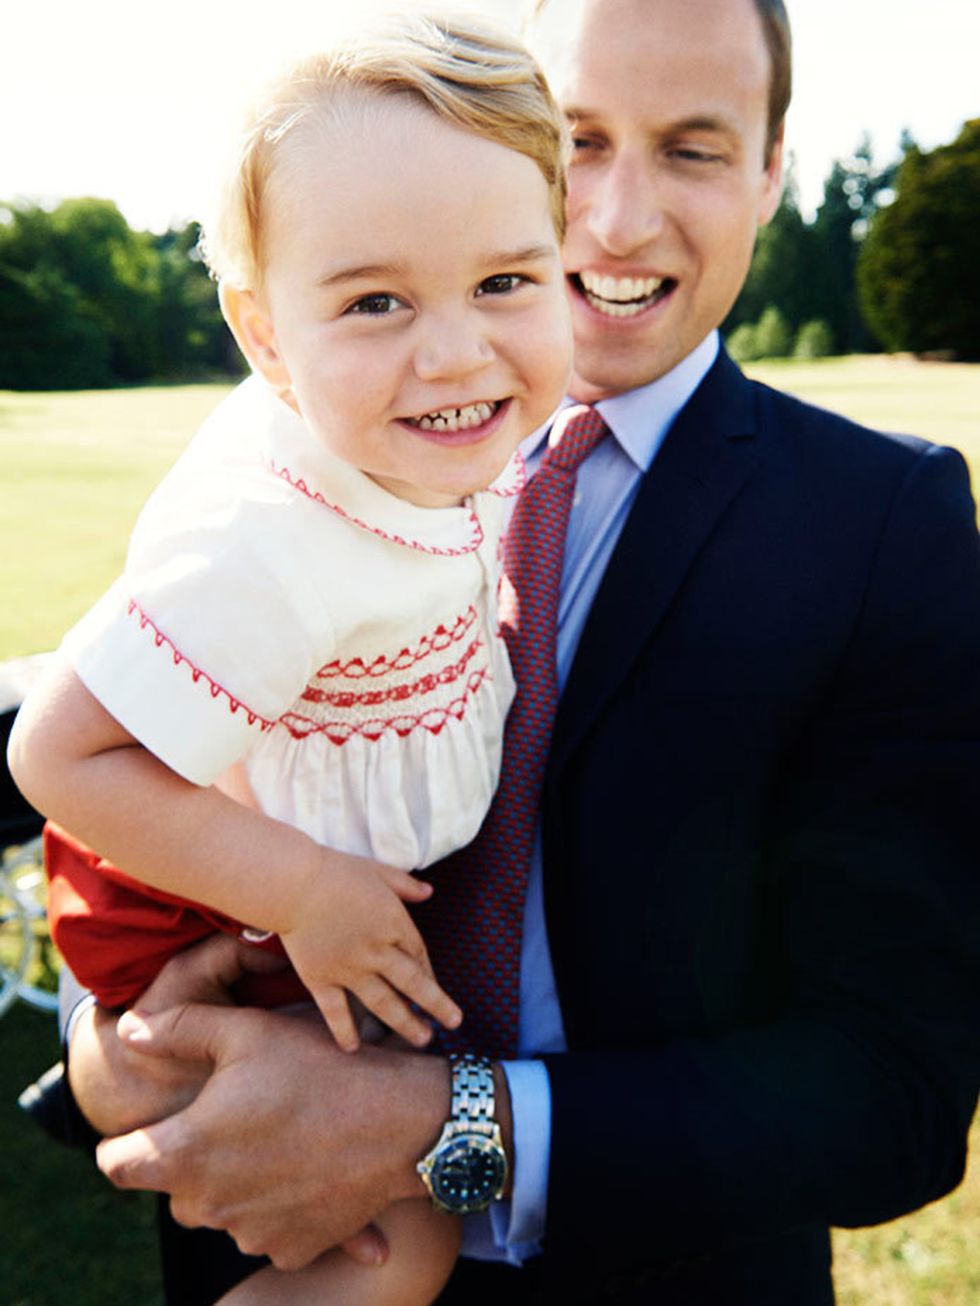 <p>A spokesman for Kensington Palace said: "This photograph captures a very happy moment on what was a special day for The Duke and<a href="http://www.cnn.com/2012/12/06/world/europe/duchess-catherine---fast-facts/index.html"> Duchess</a> and their family